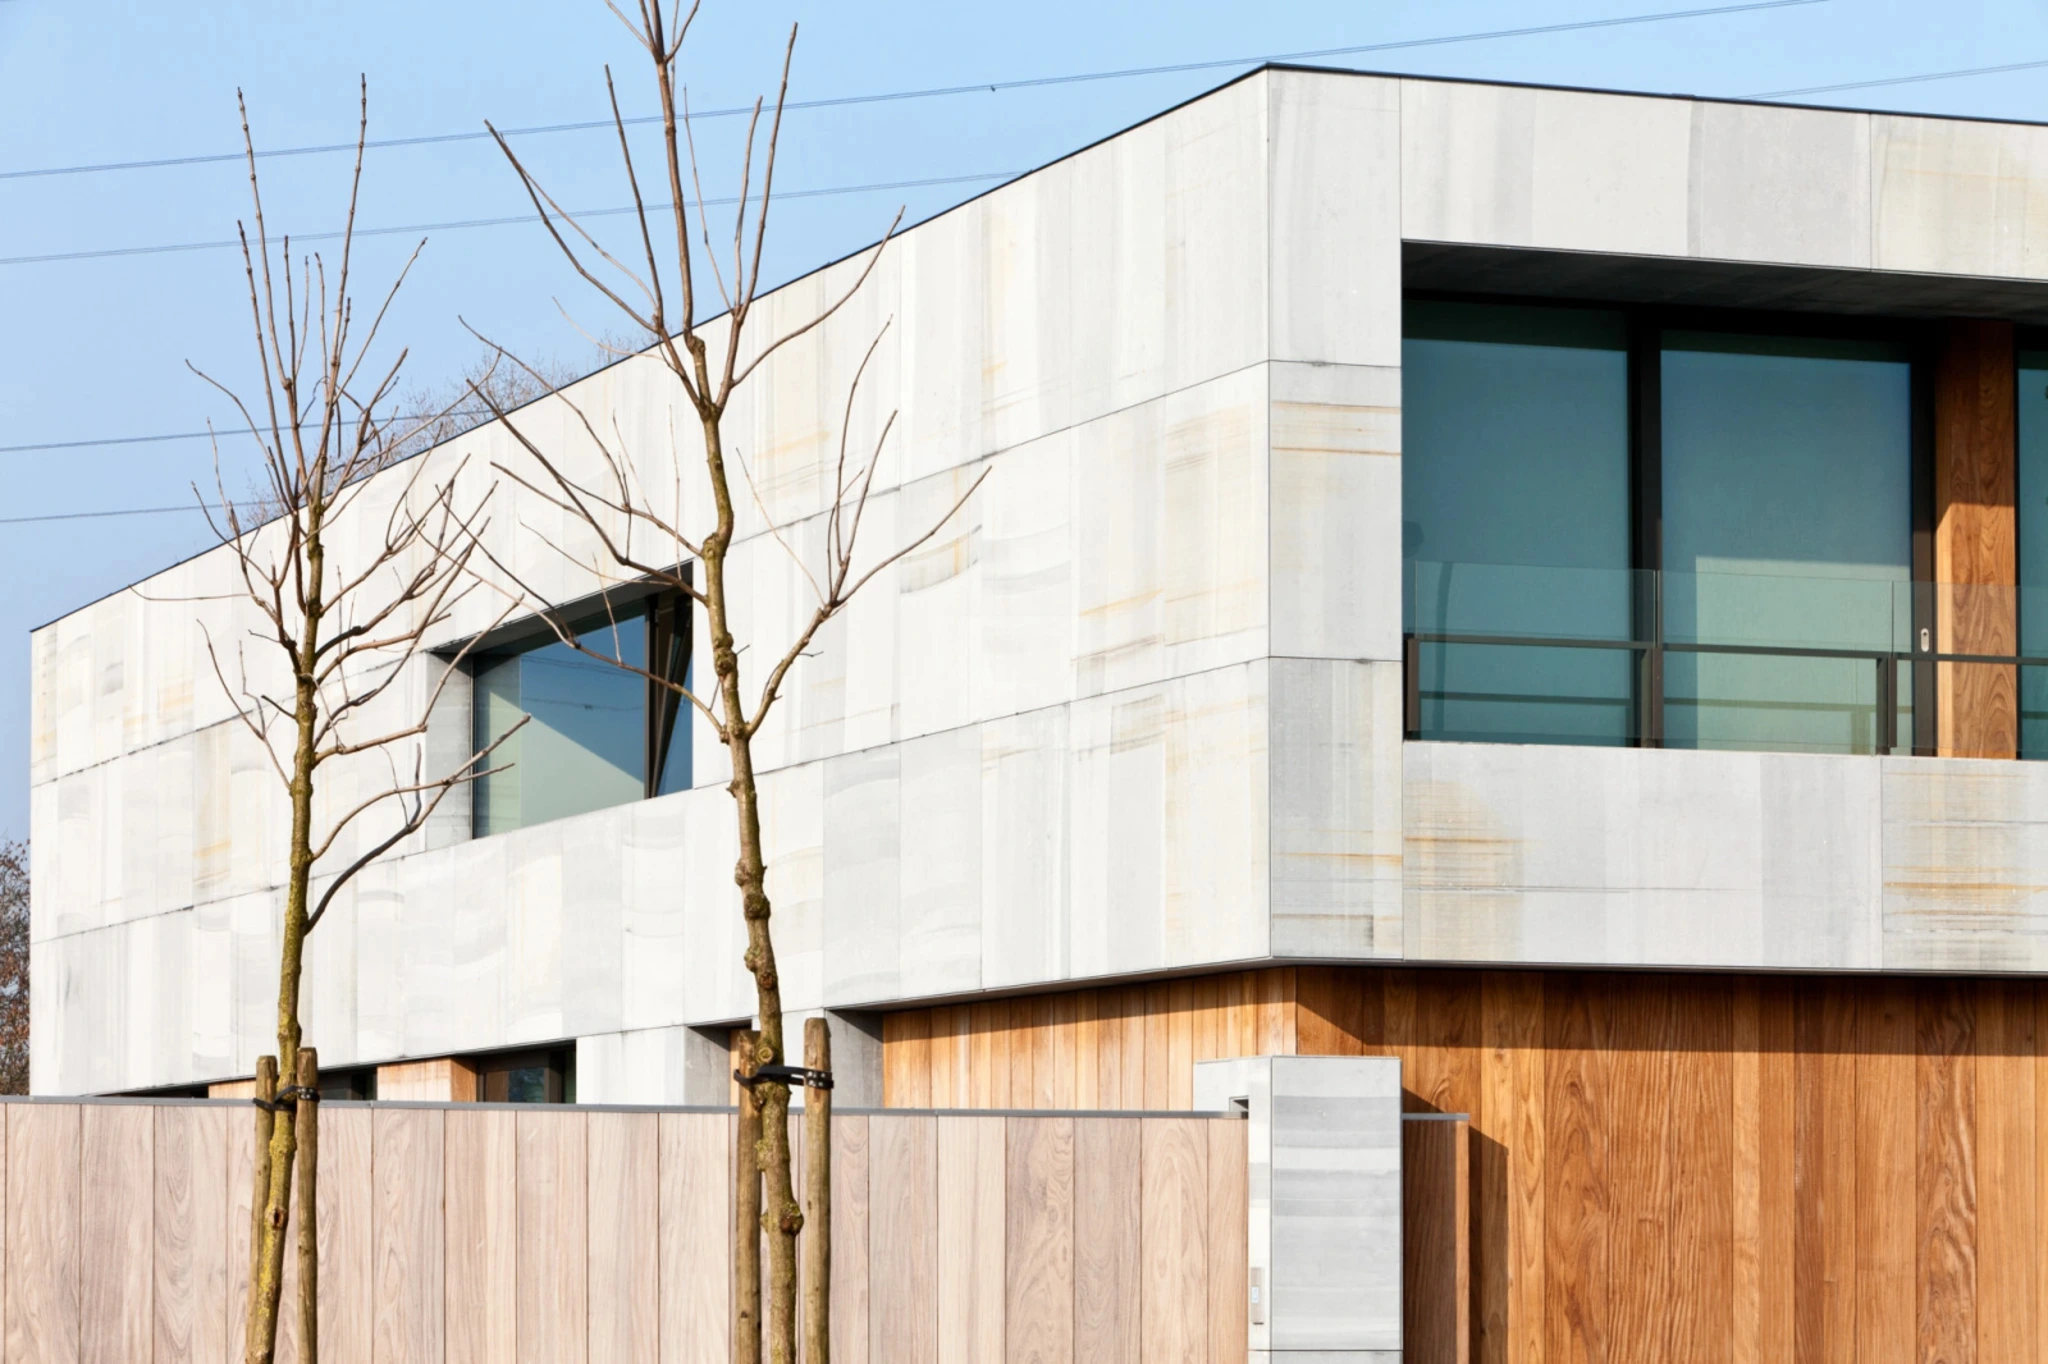 Natural stone facade: reveal the beauty of architecture with Hainaut bluestone